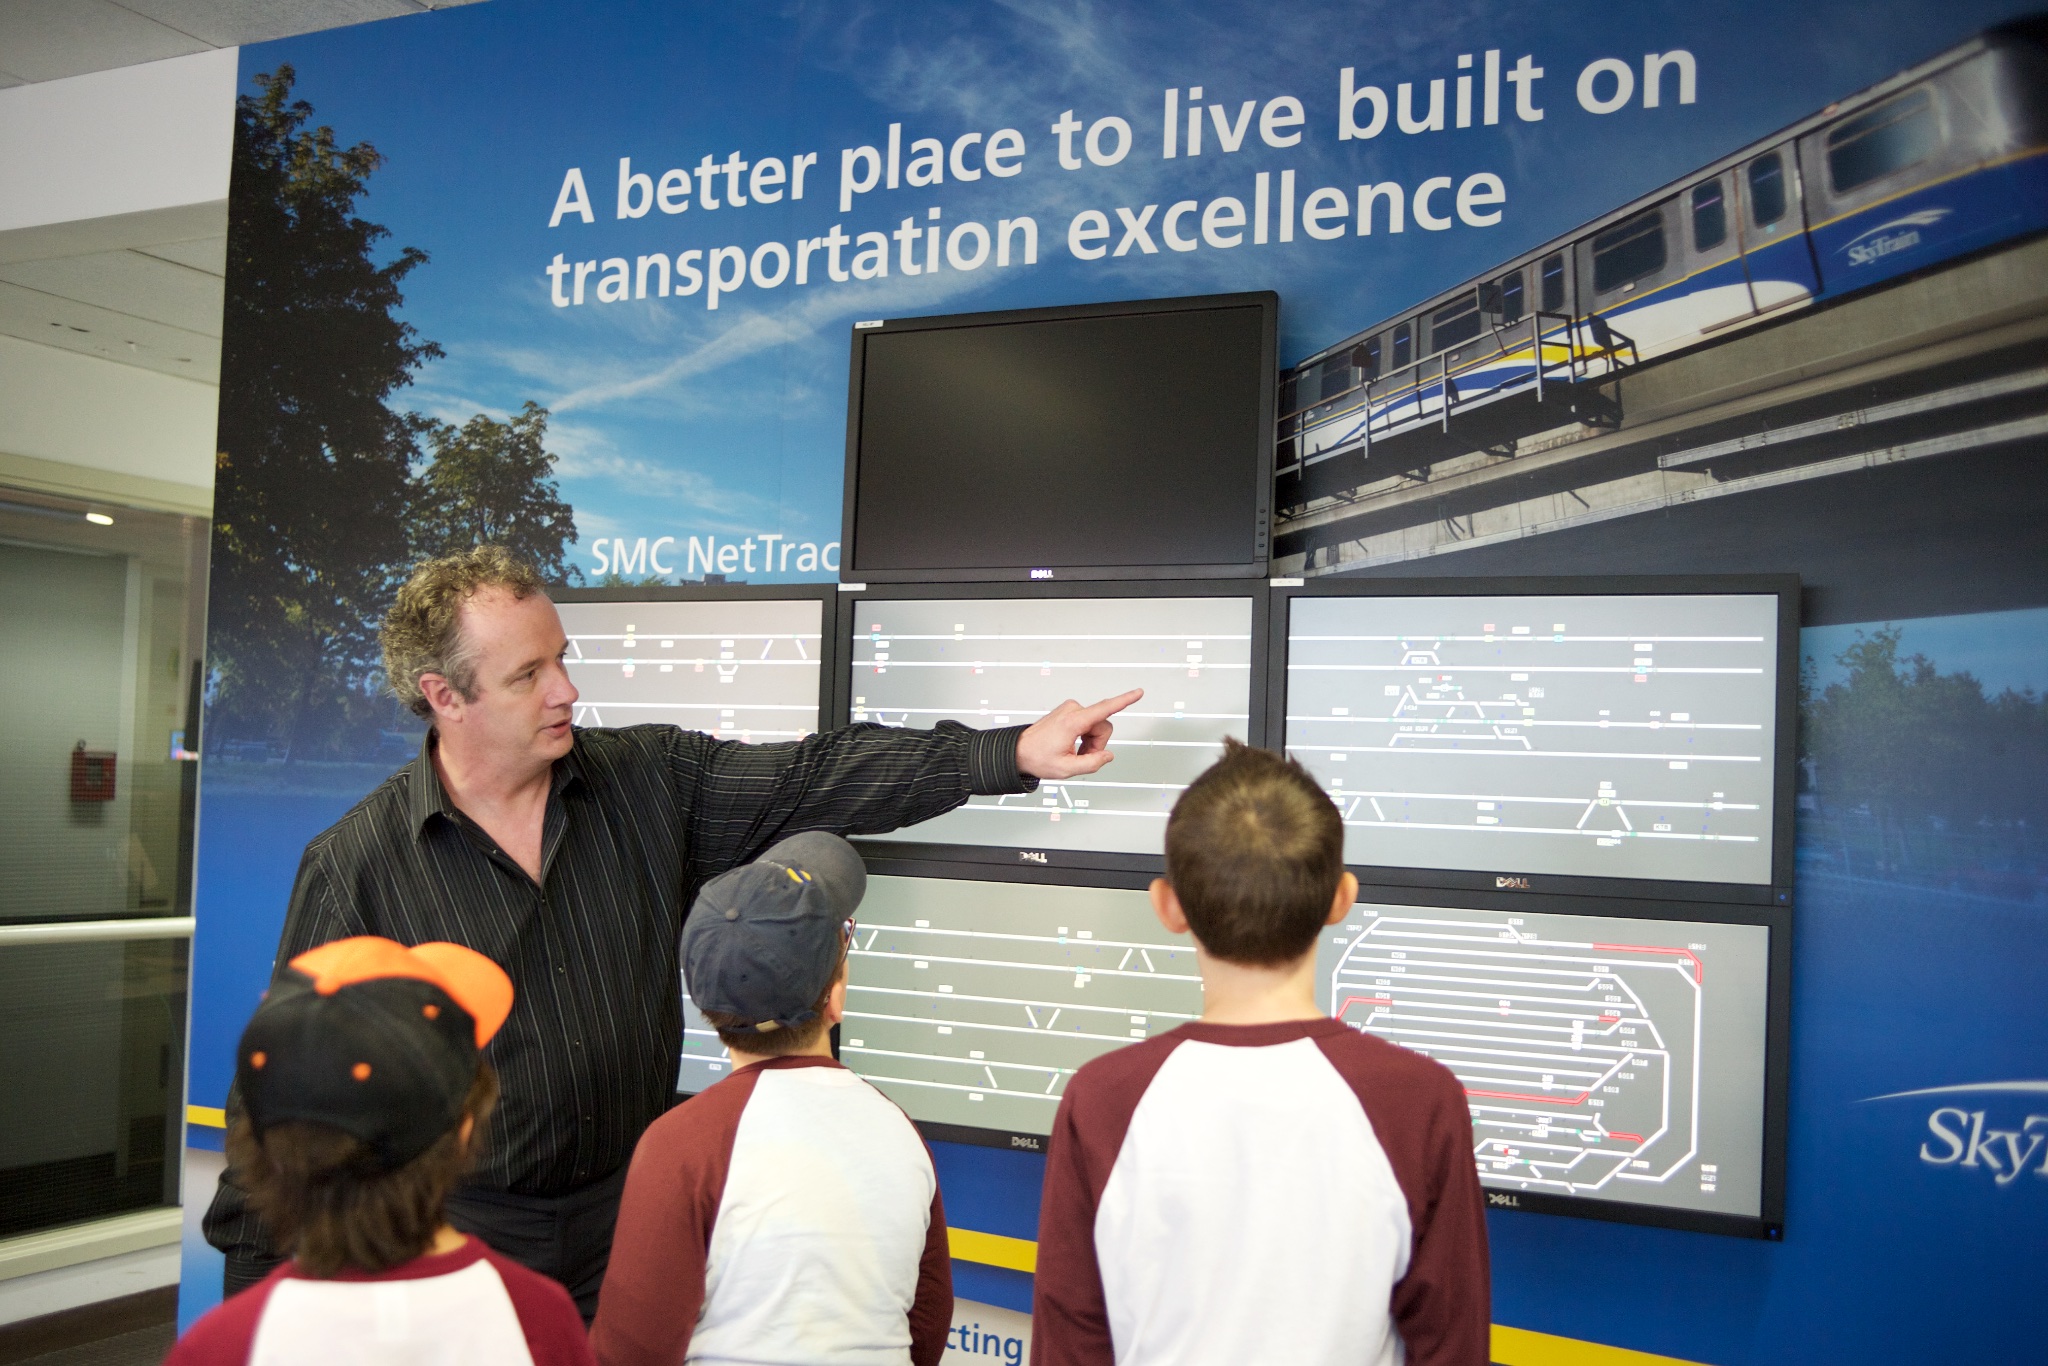 Campers at SkyTrain Operations got a look at how the SkyTrain runs